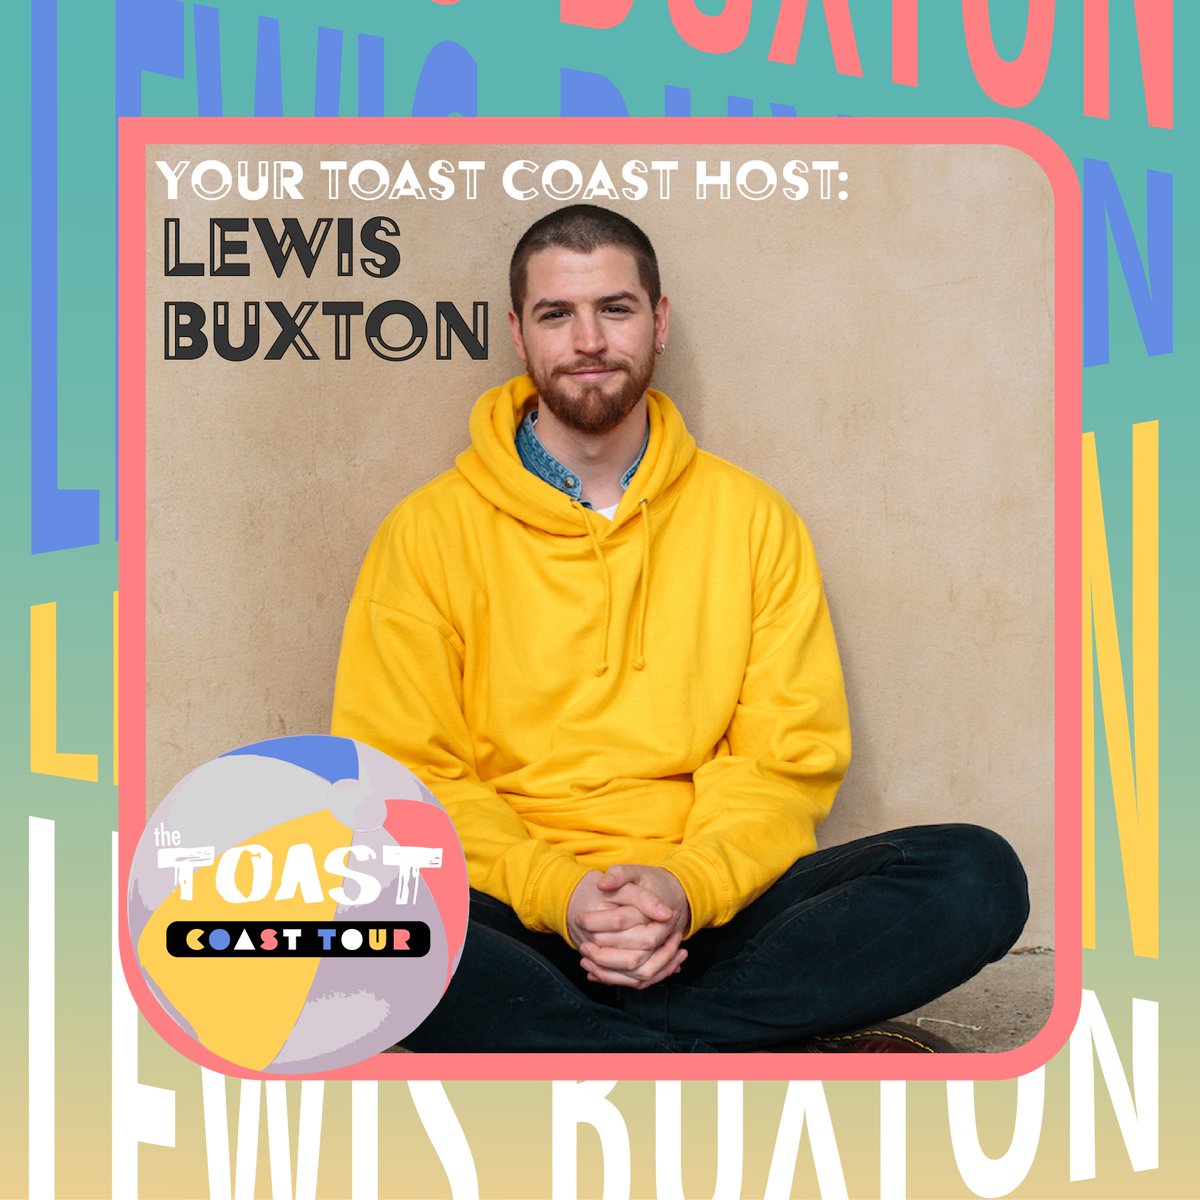 We love a trip to the seaside! Come to @SheringhamLT for an evening of poetry, spoken word and story telling. All hosted by @LewisBuxton93 sheringhamlittletheatre.com/shows/the-toas…